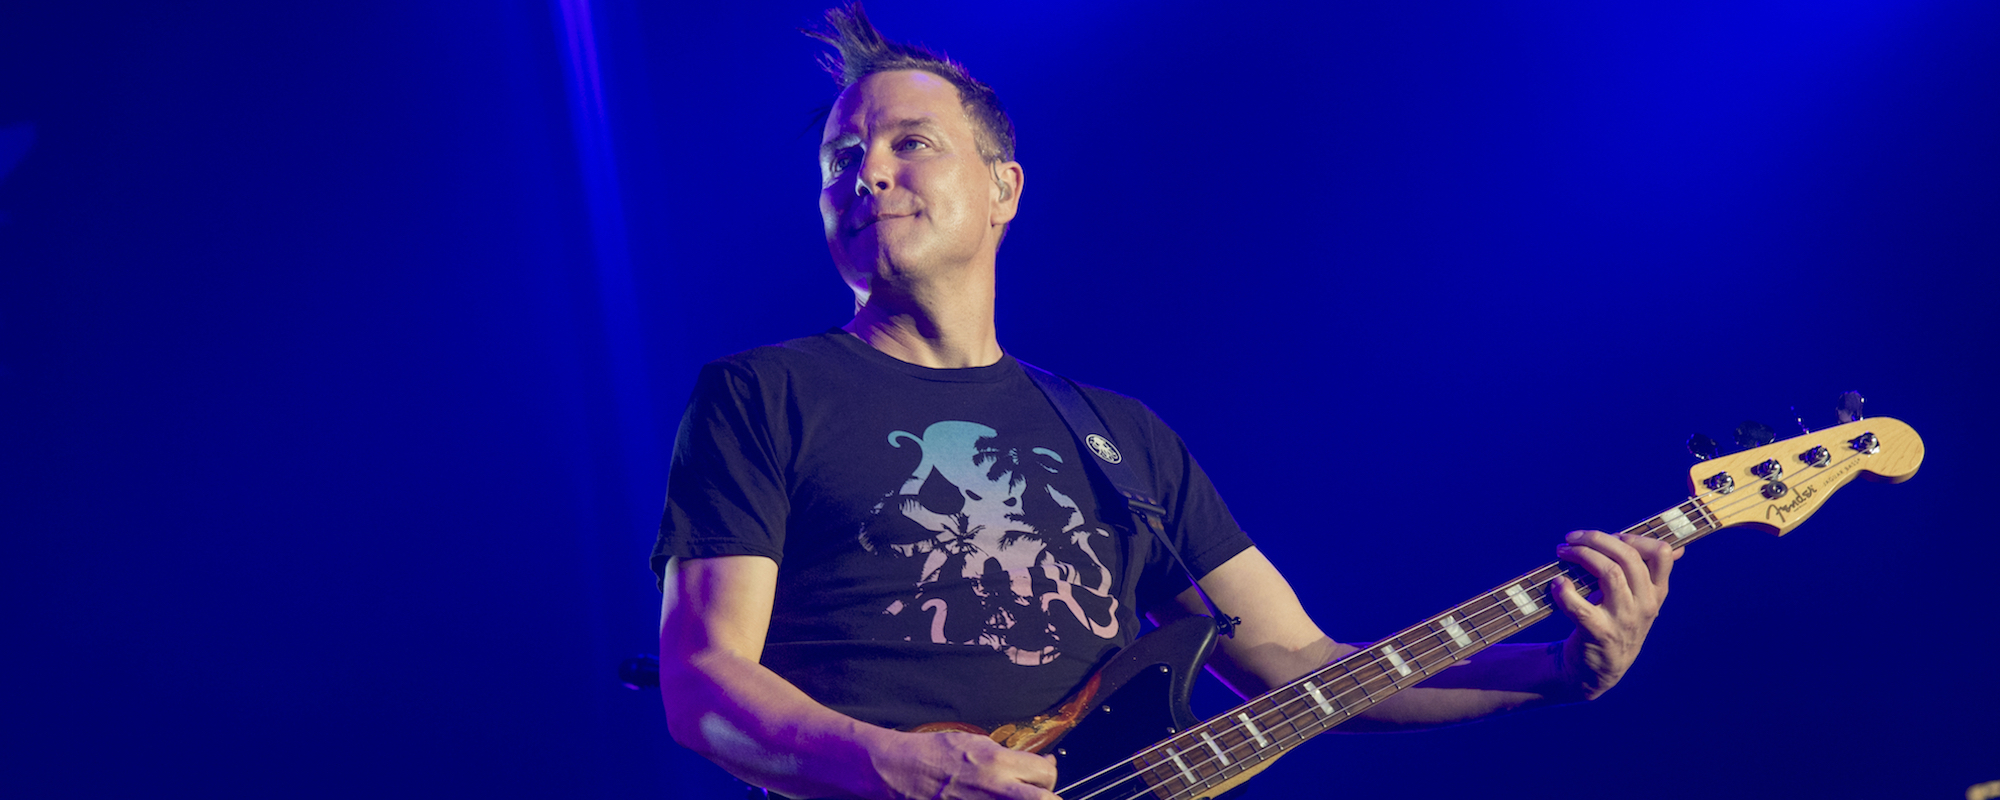 Blink-182’s Mark Hoppus Performs for First Time Since Cancer Diagnosis